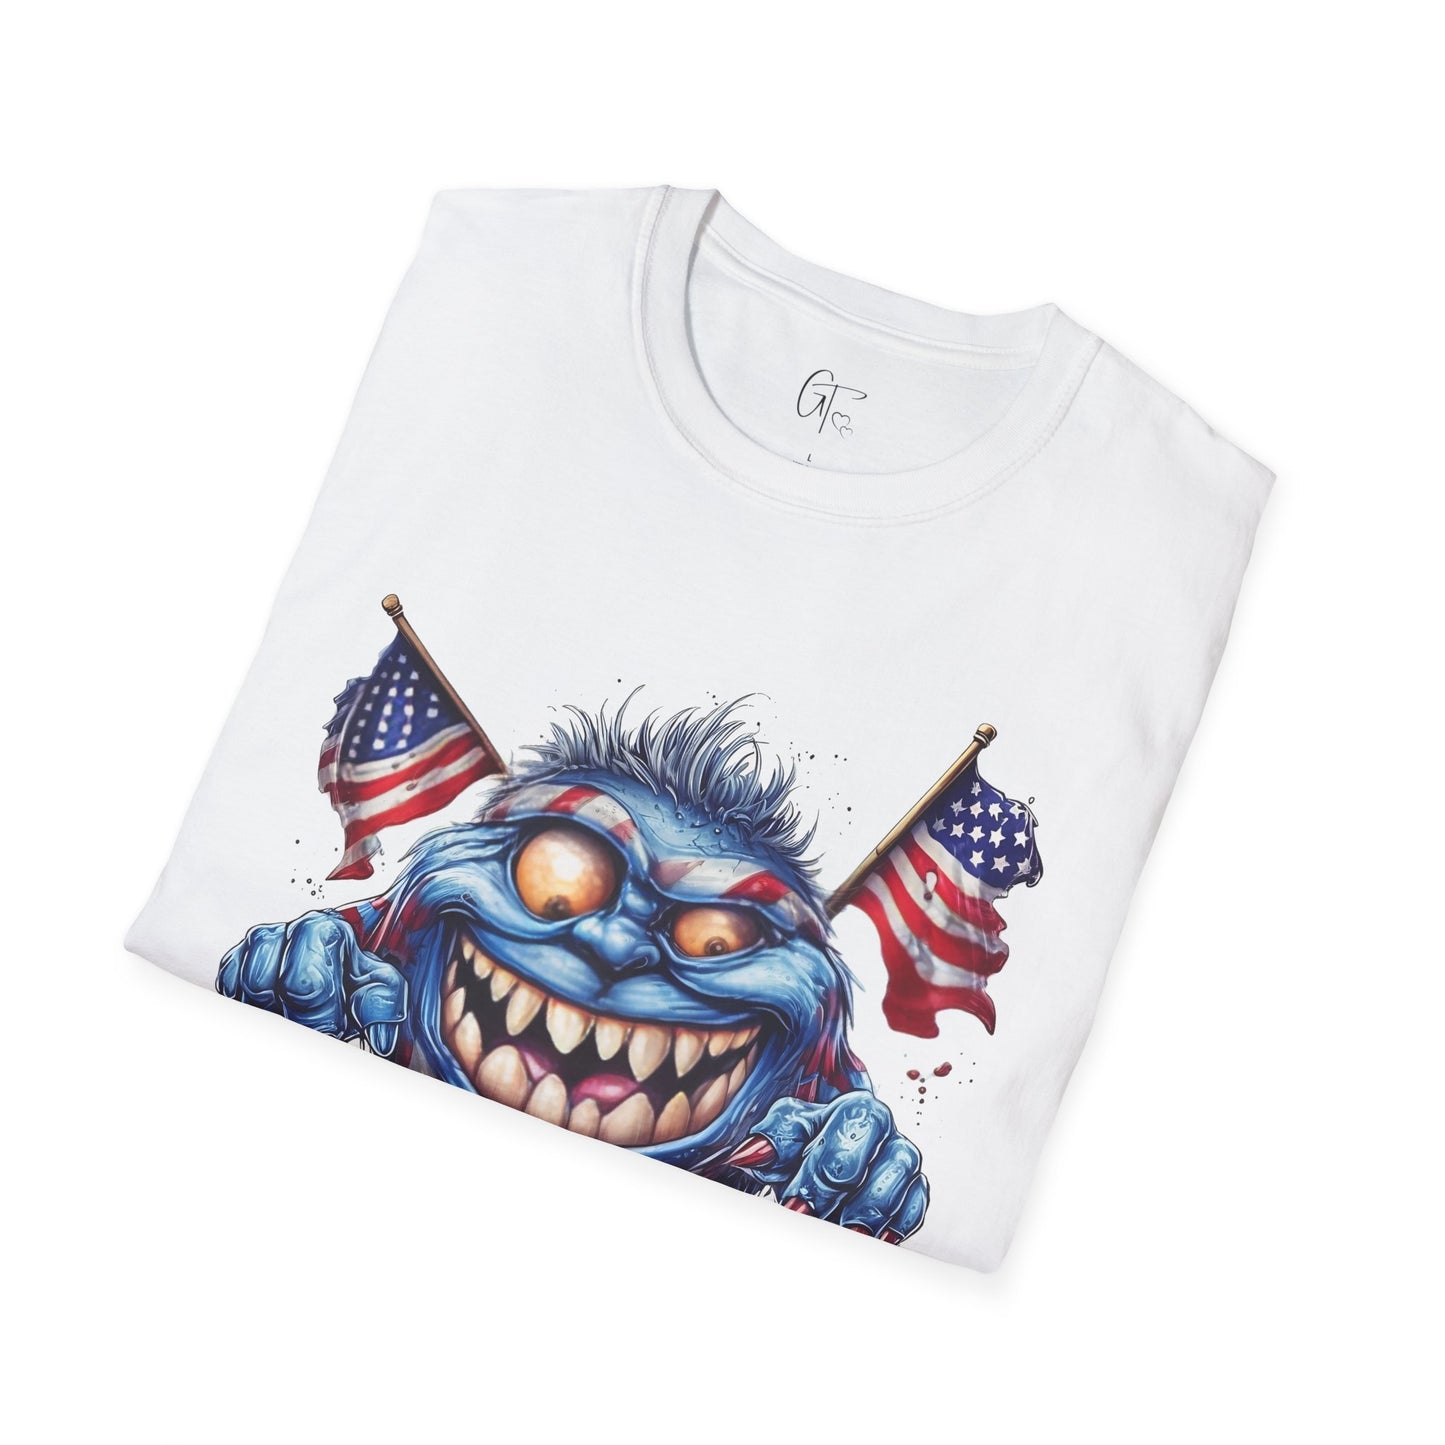 SUB1926 Monster Truck 4th of July Patriotic T-Shirt